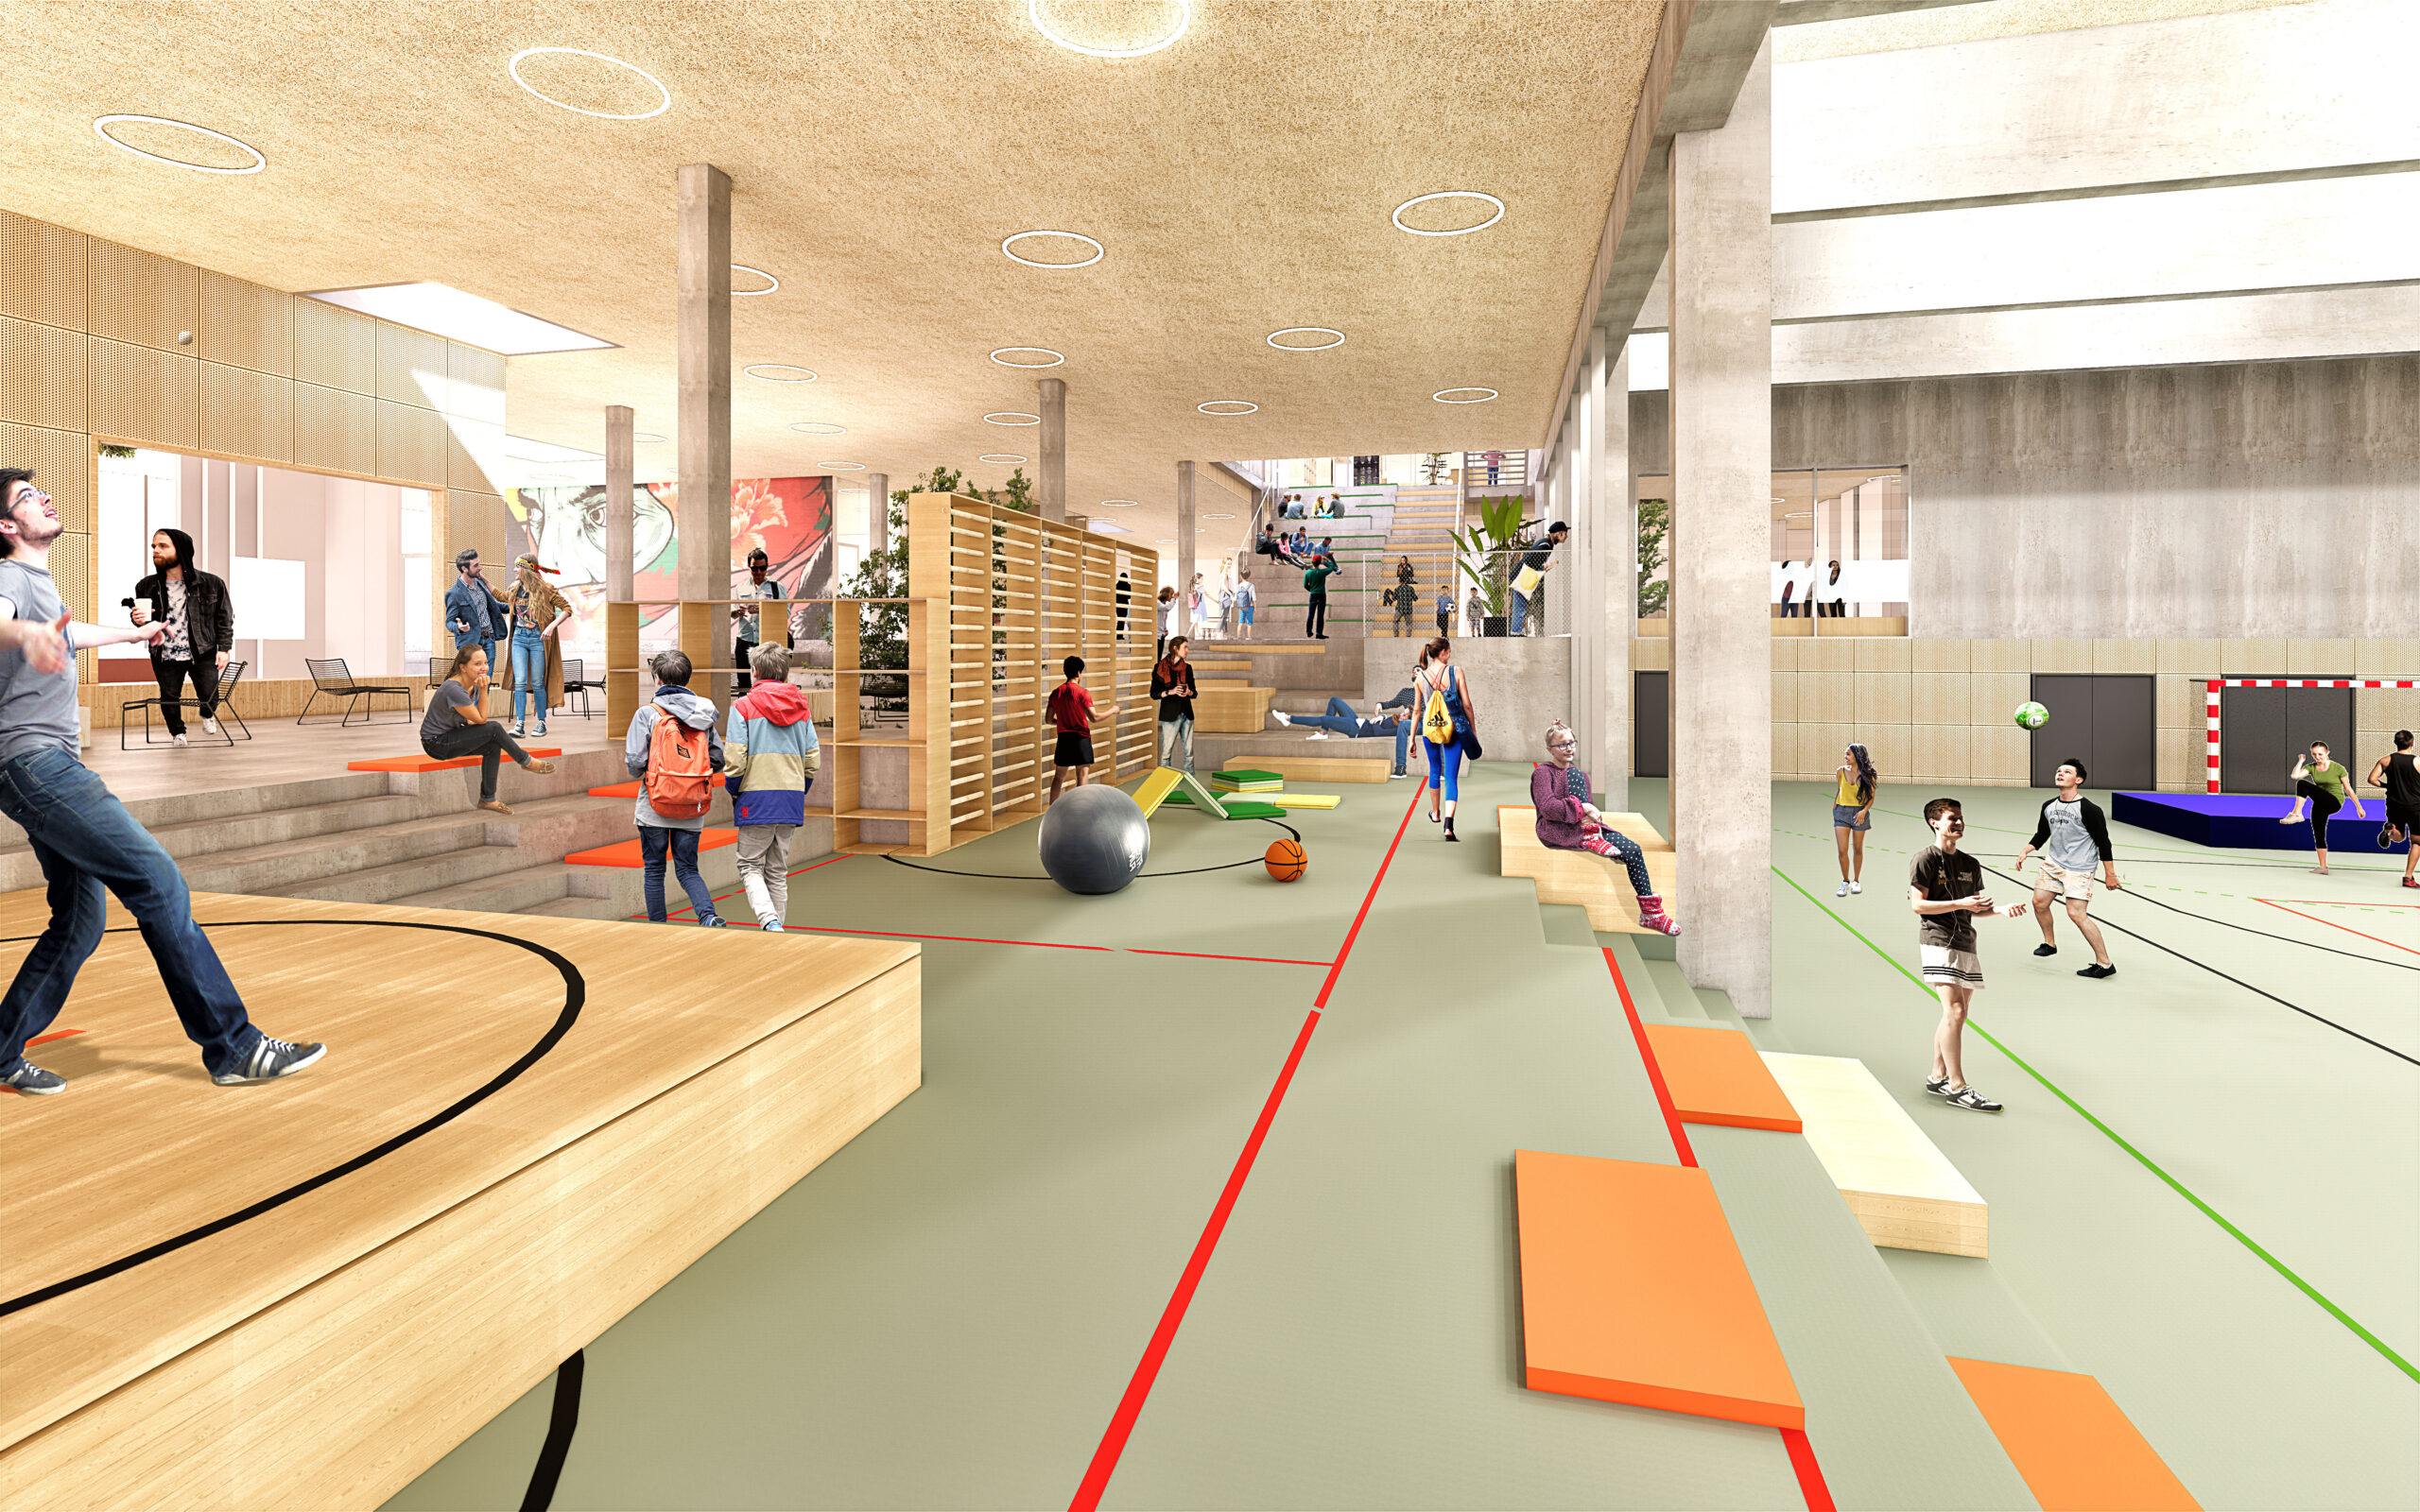 Collage of Nordøst Amager School's gym in use, featuring a harmonious blend of wooden elements and furniture, accentuated by natural light that floods the space.